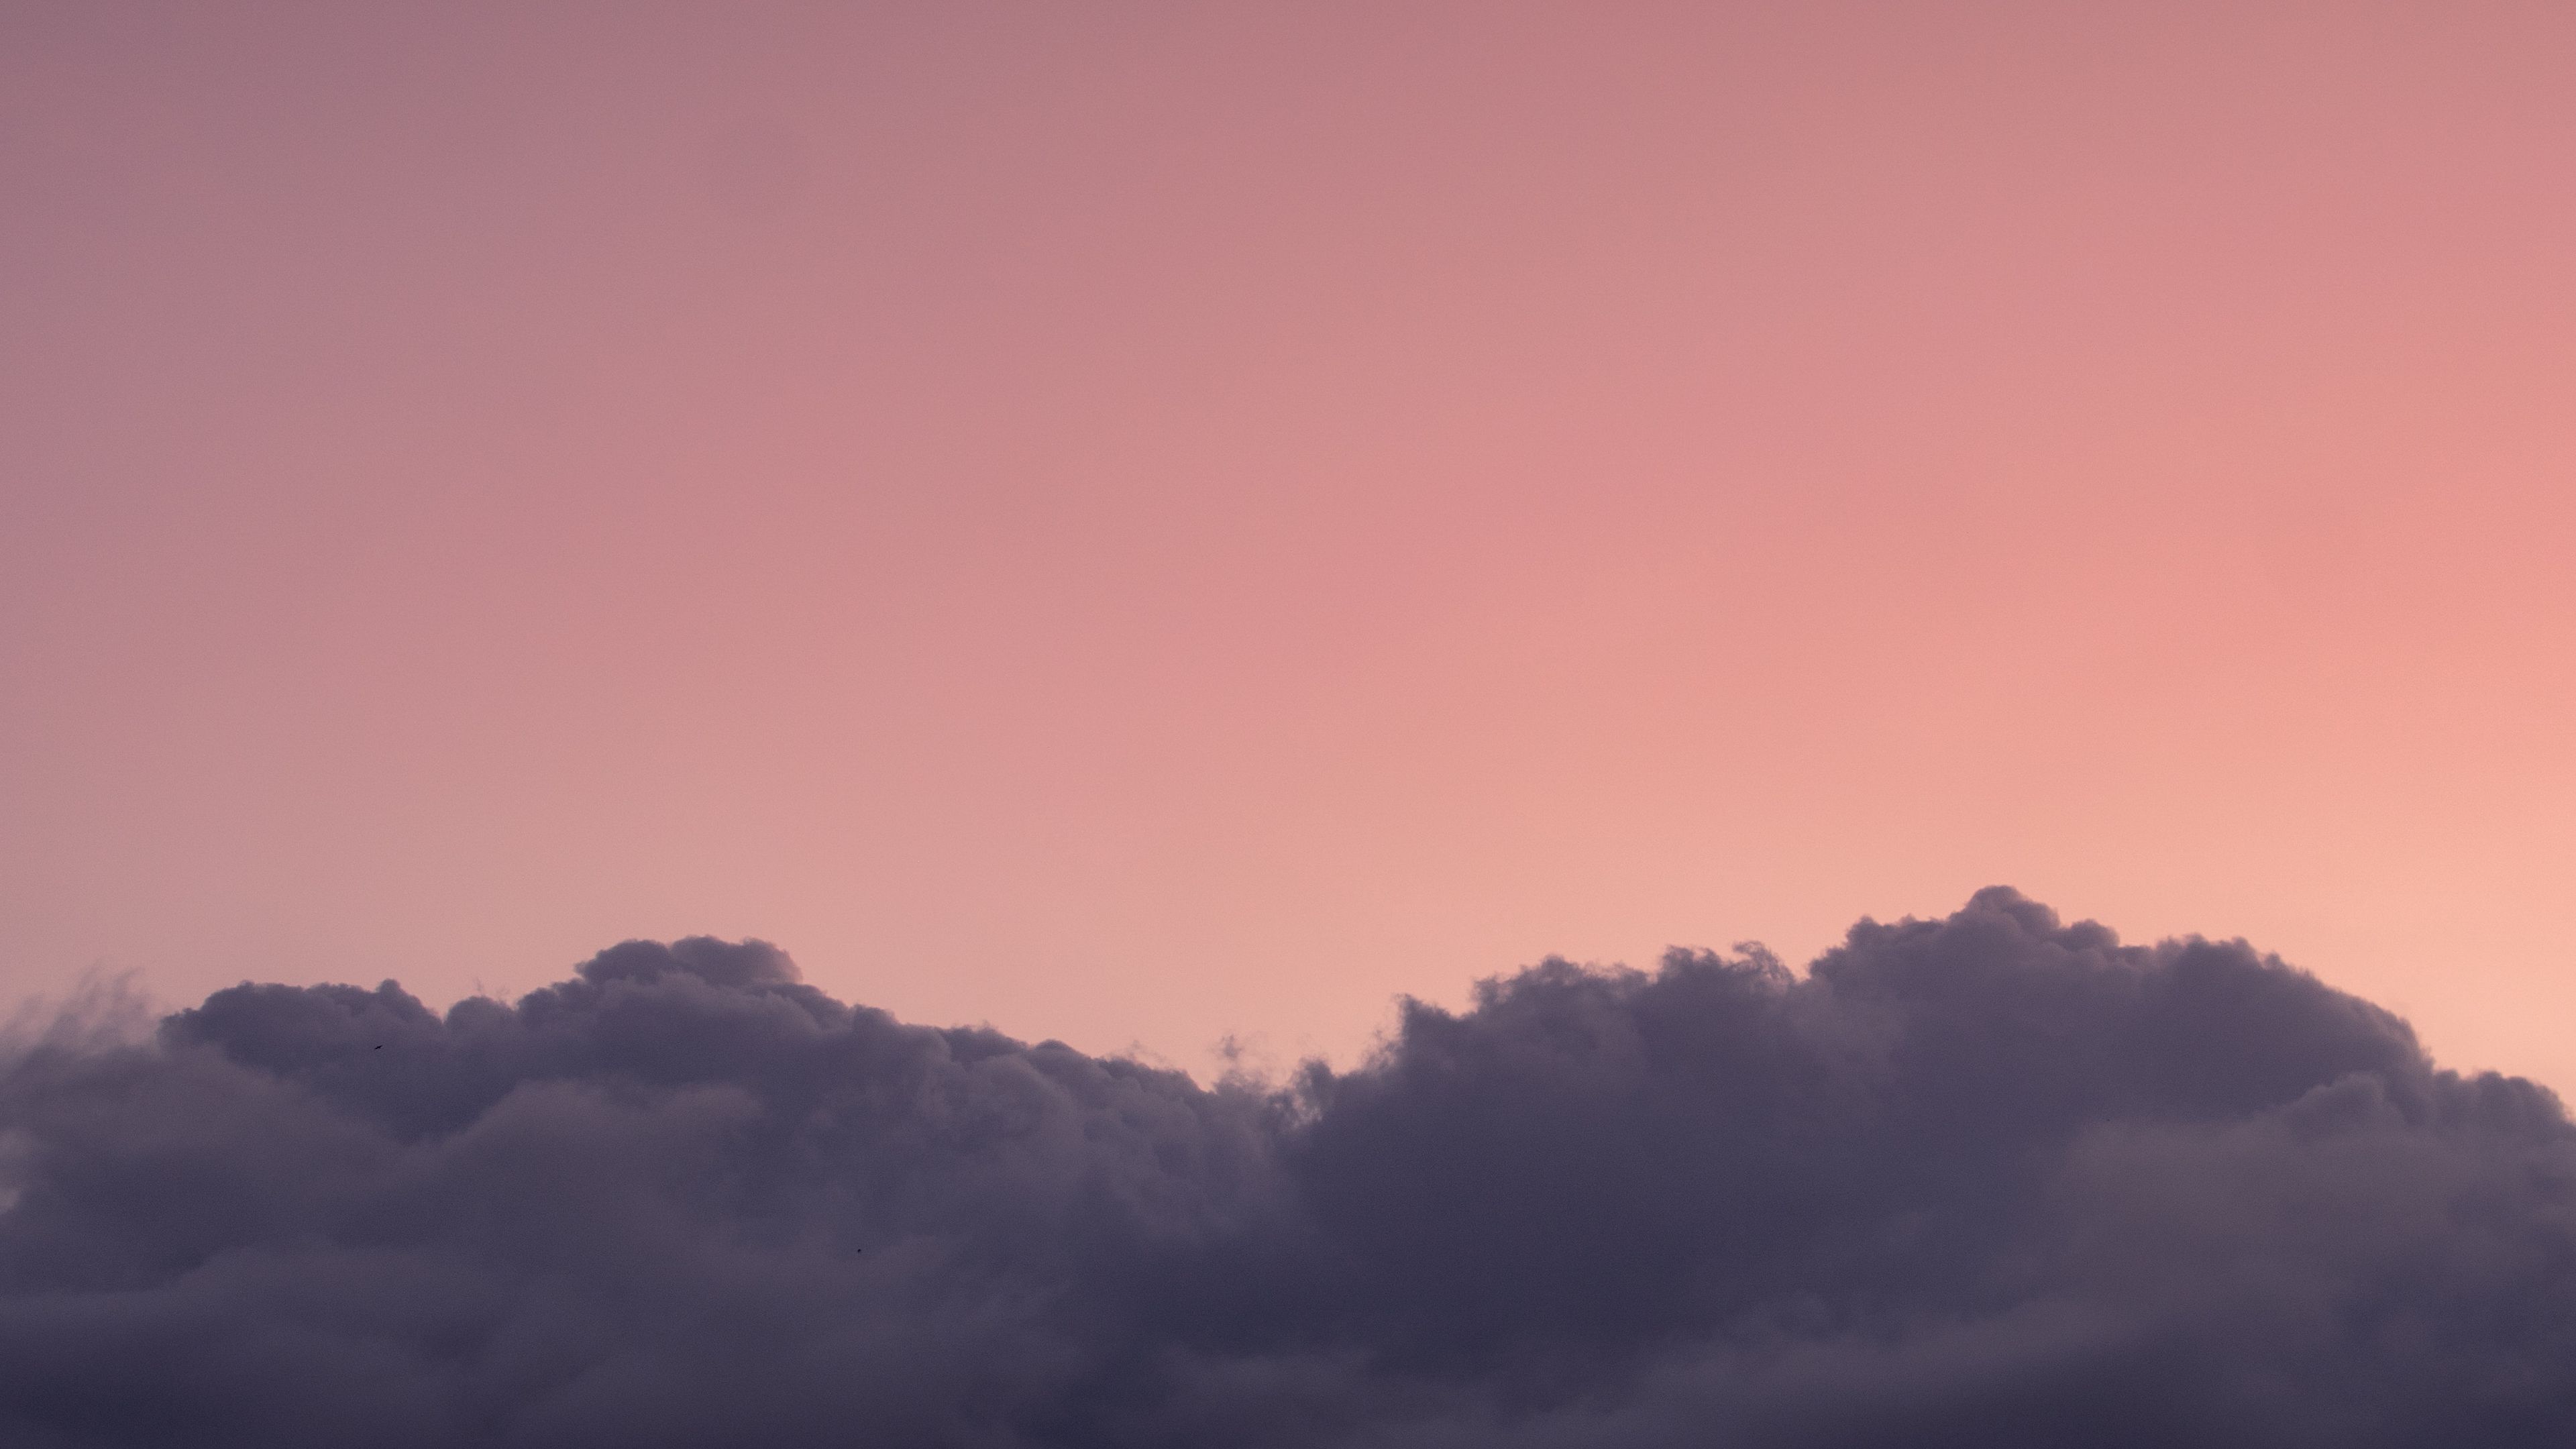 Download wallpaper 3840x2160 clouds, sky, pink, evening 4k uhd 16:9 HD background